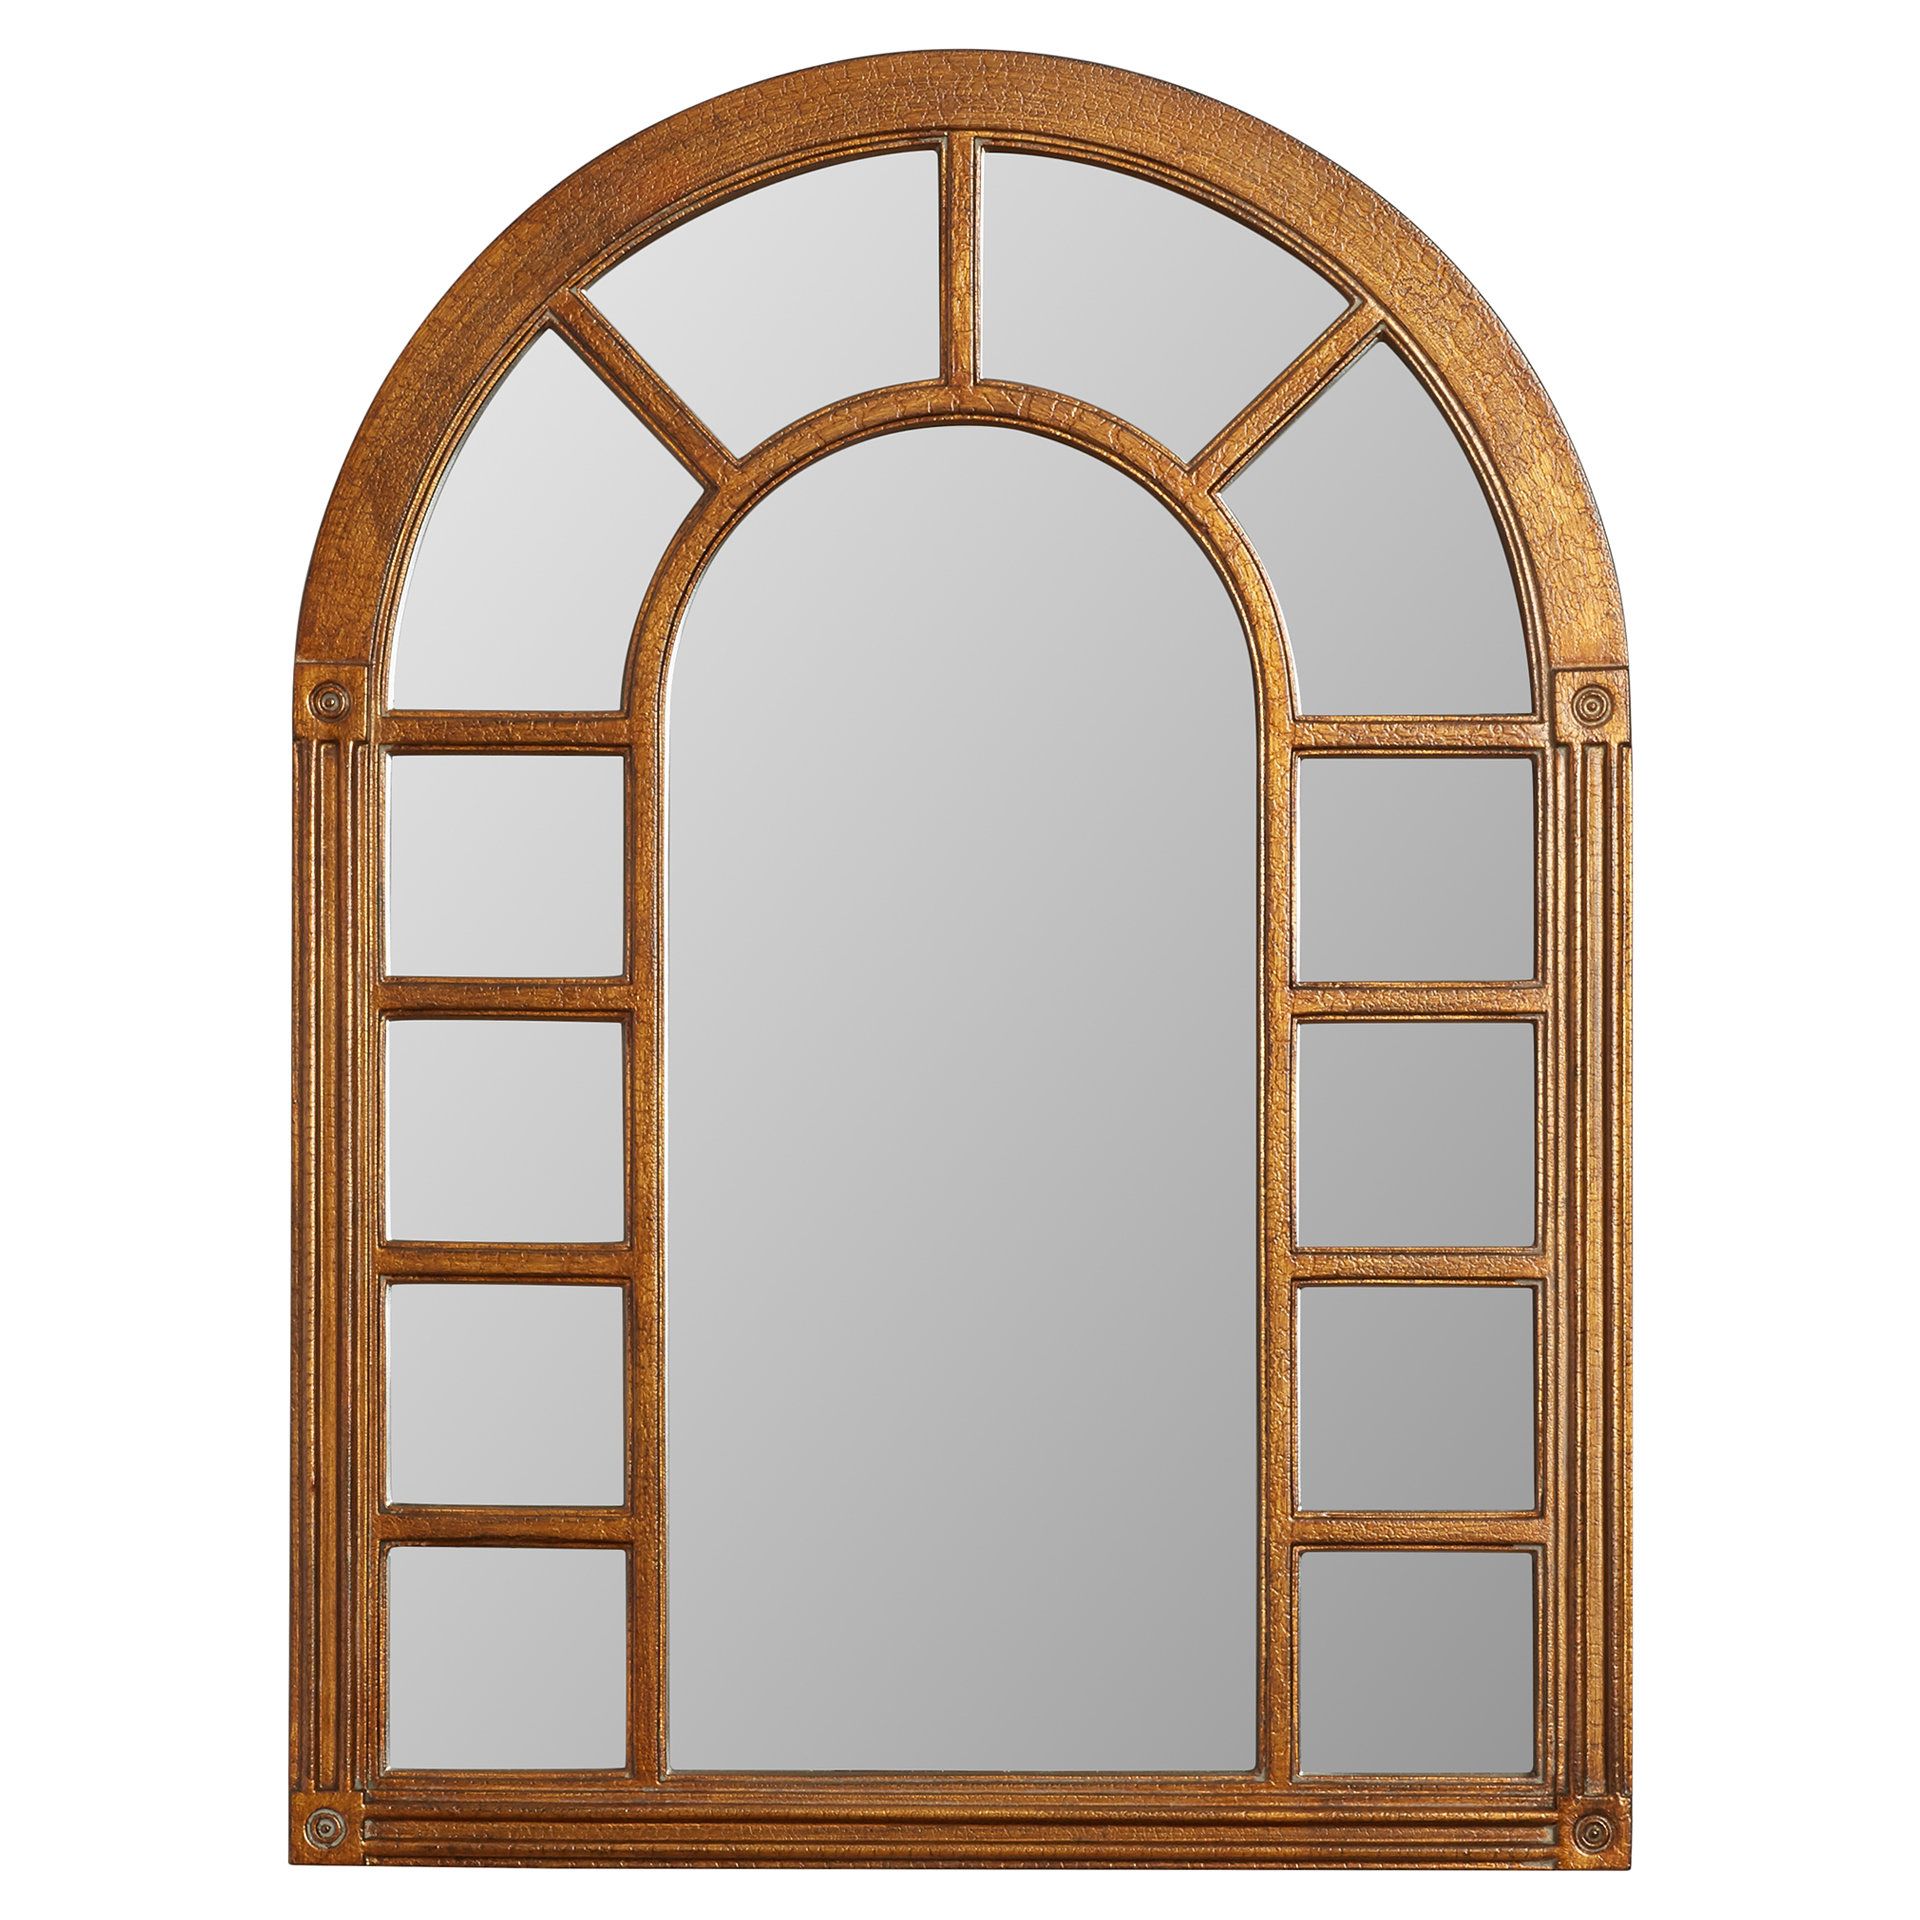 Juliana Accent Mirror Throughout Most Popular Juliana Accent Mirrors (View 4 of 20)